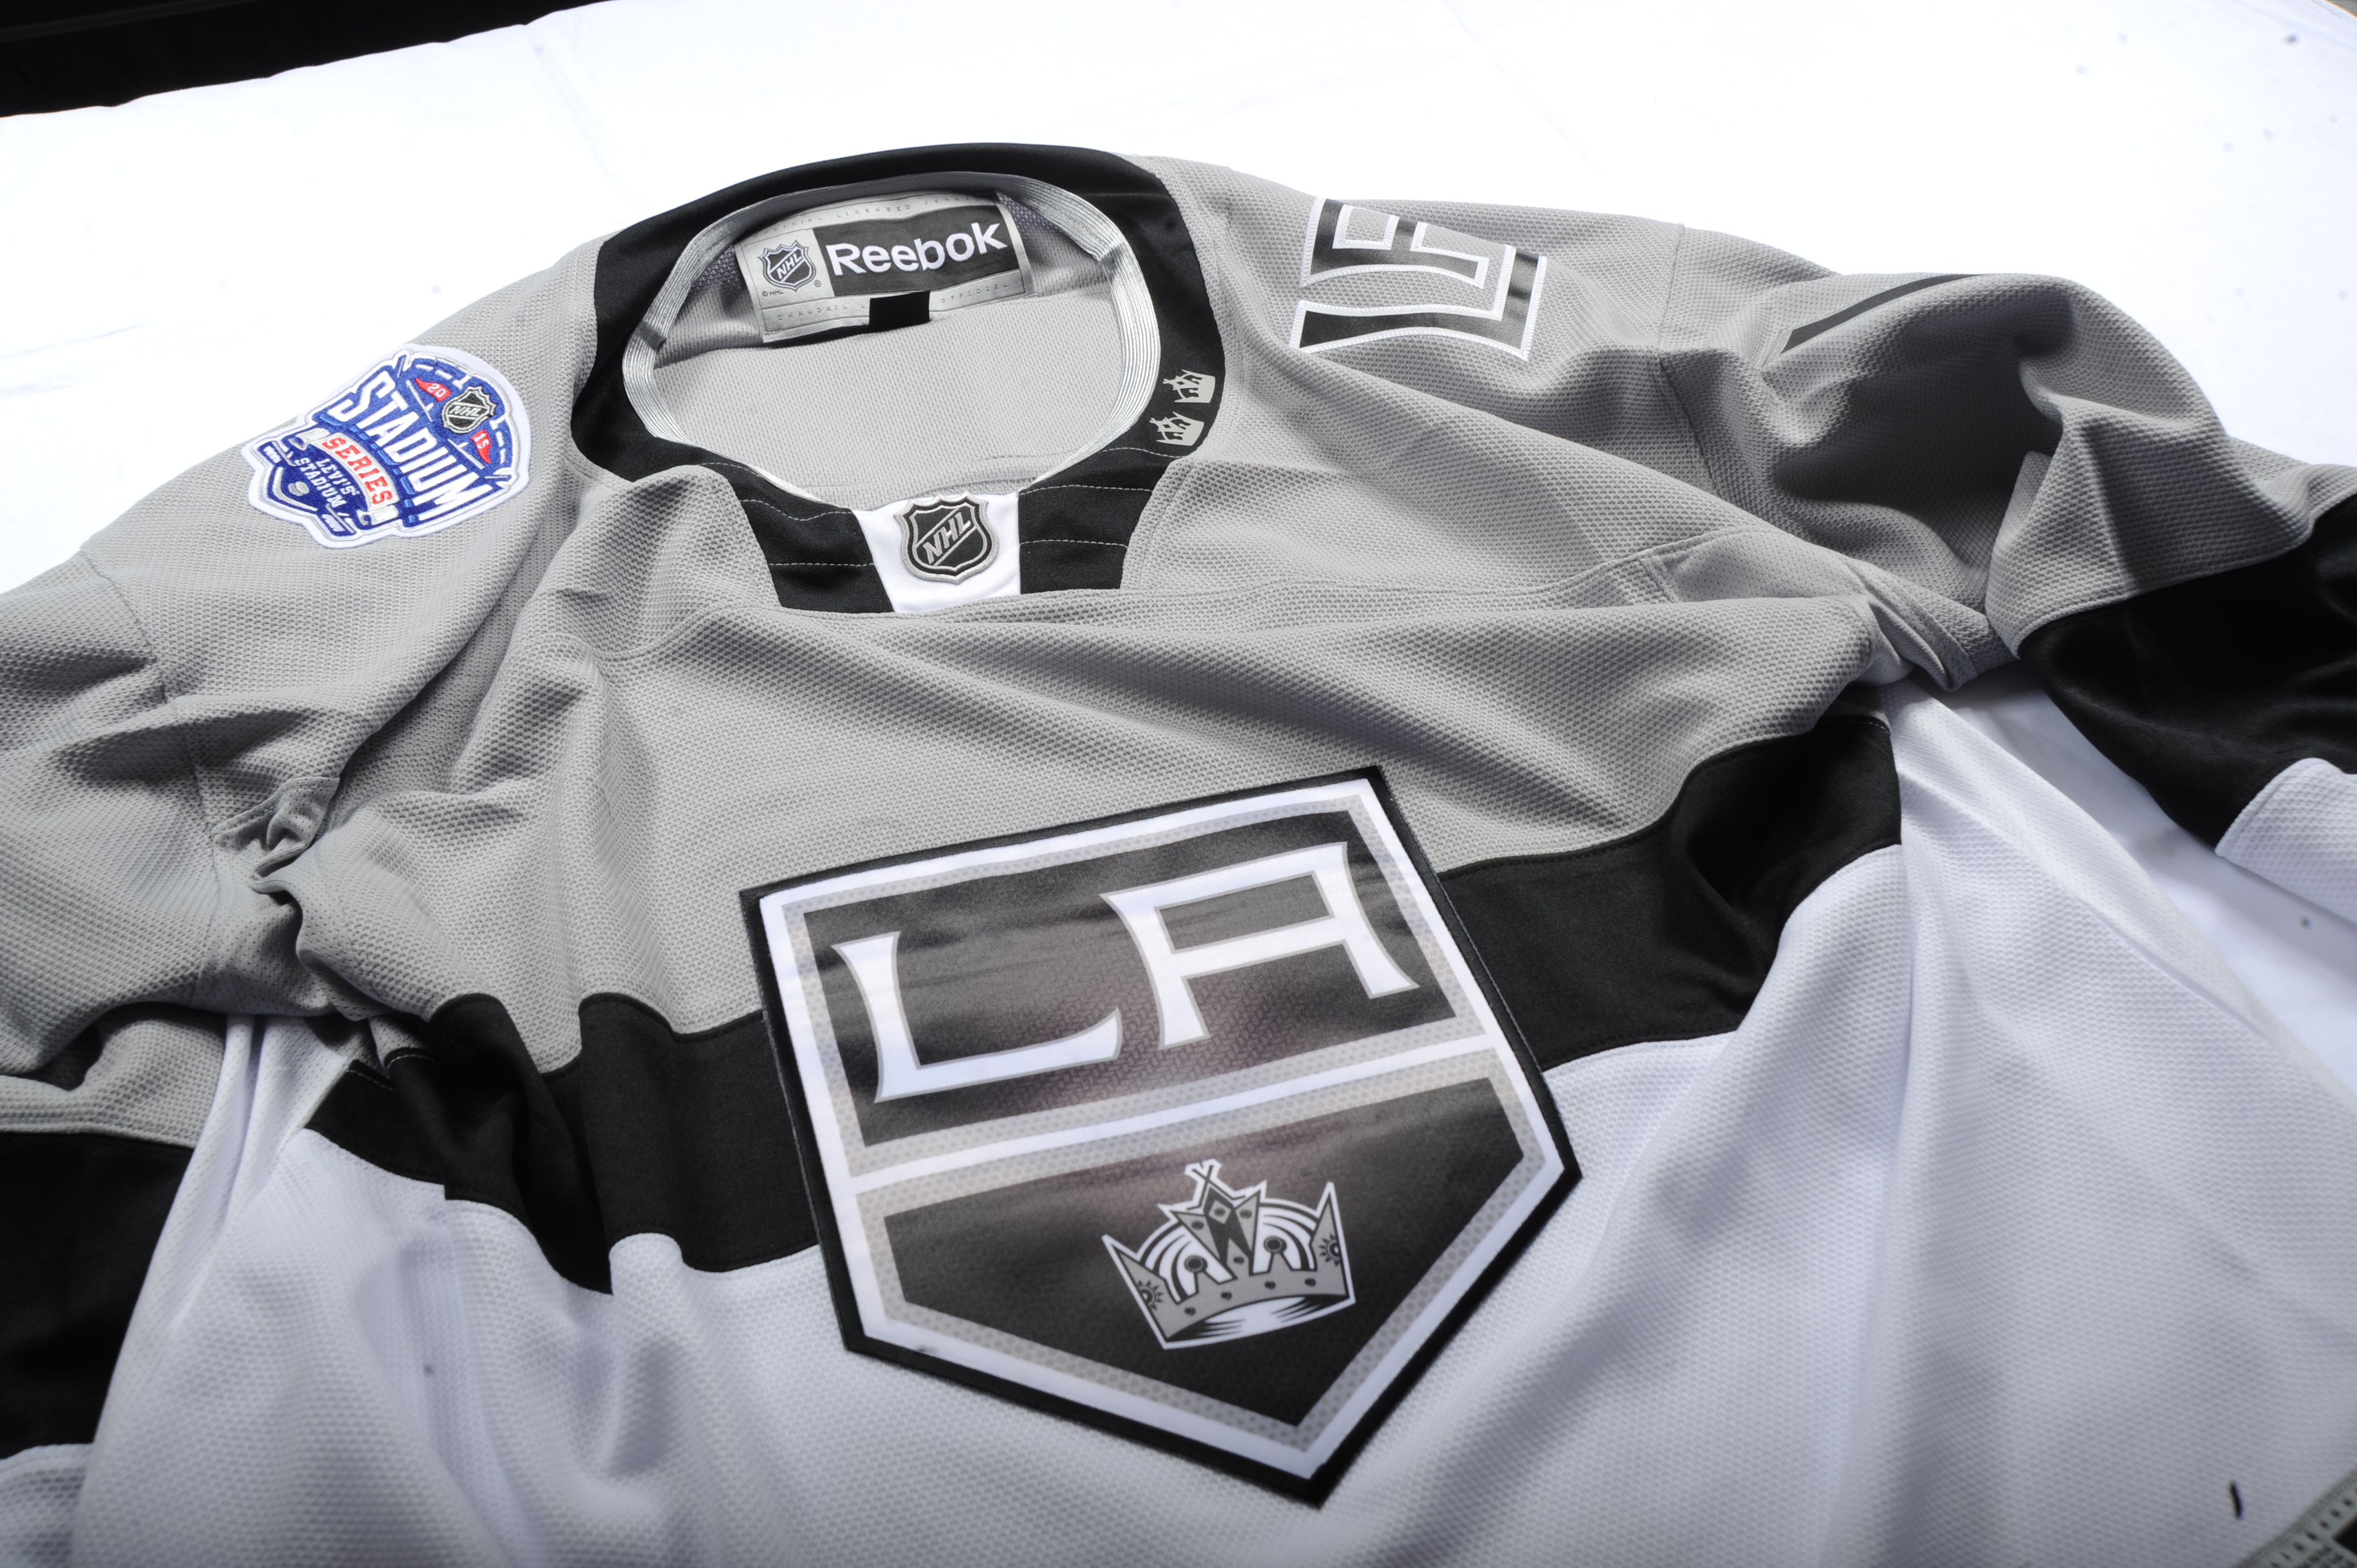 The LA Kings officially unveiled their Stadium Series uniform and